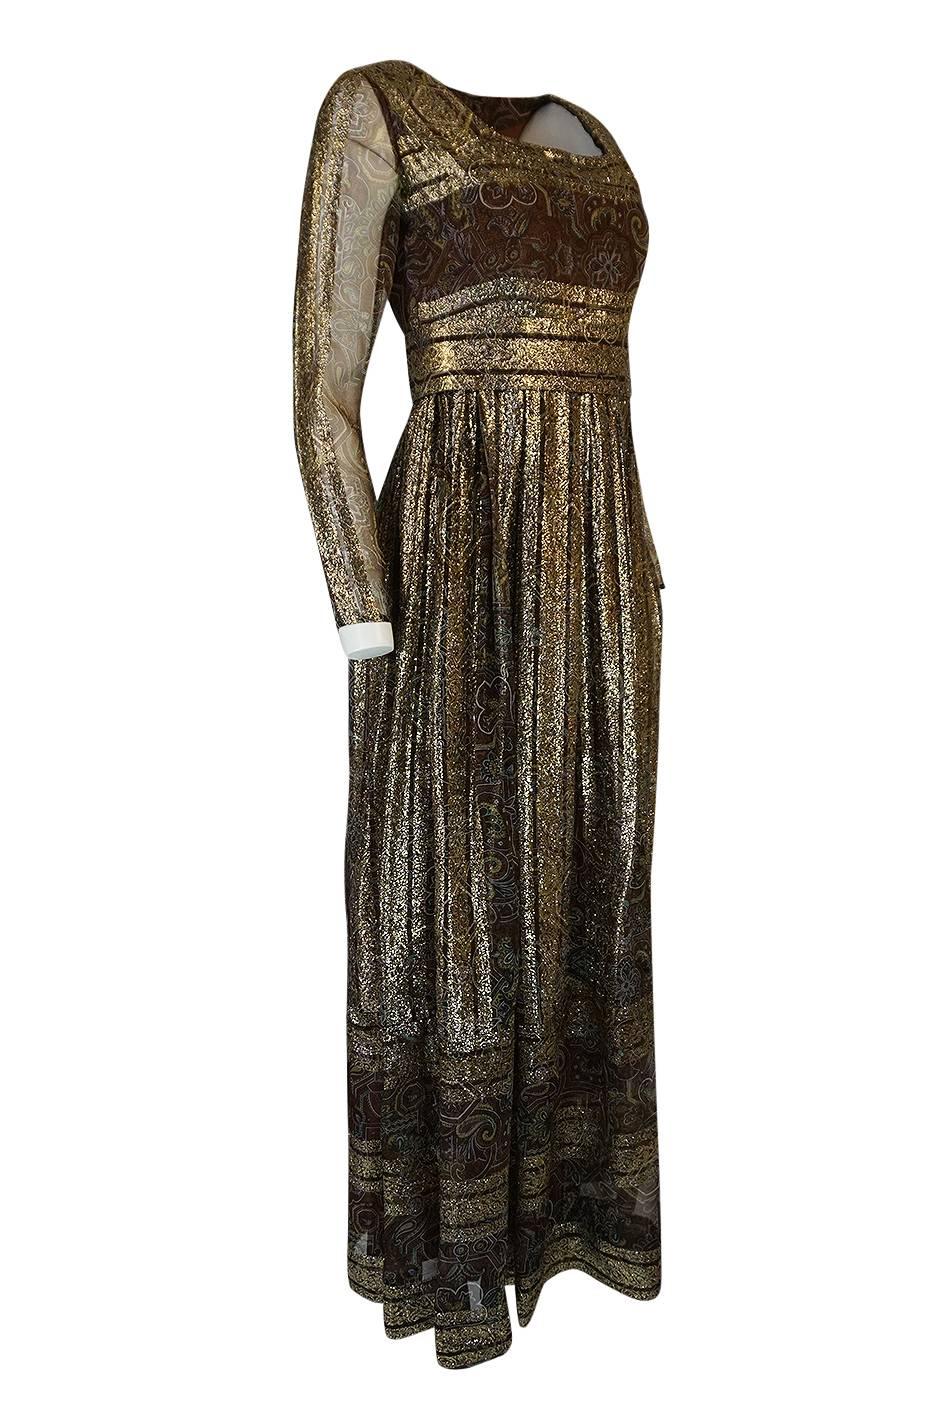 Christian Dior by Marc Bohan Demi-Couture Gold and Printed Silk Dress, c 1968 In Excellent Condition In Rockwood, ON